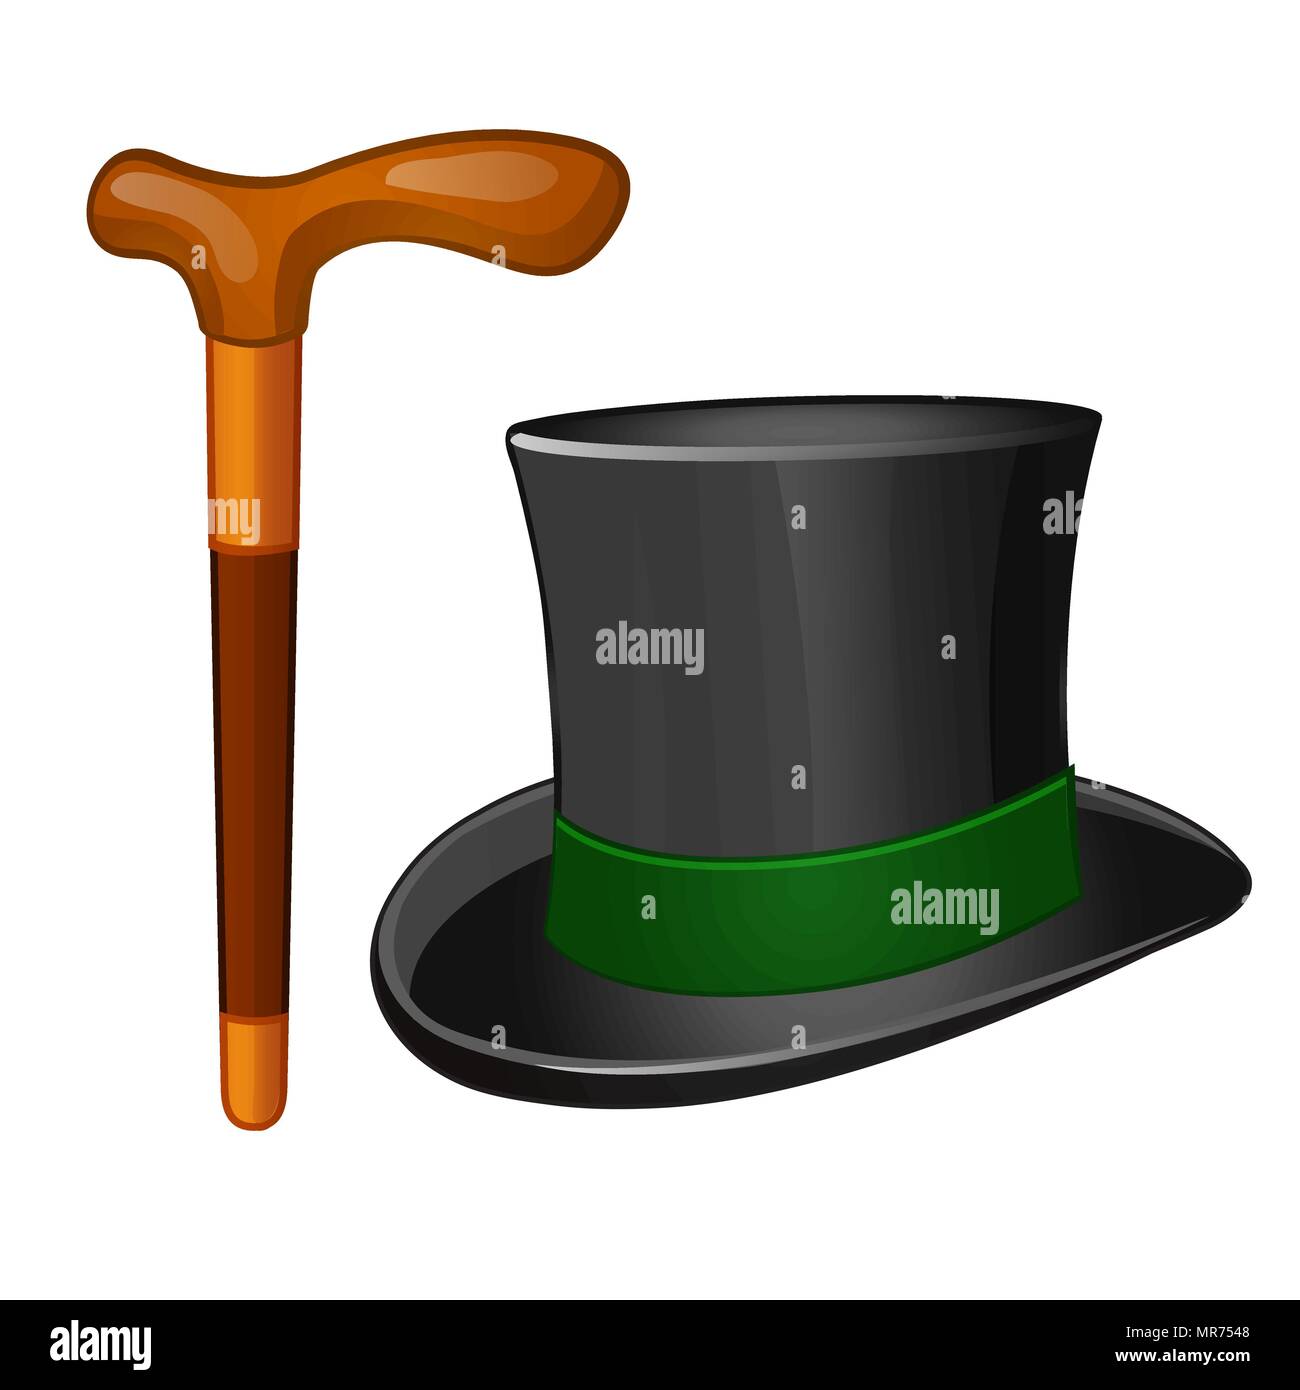 Classic accessories gentleman. Cylinder hat and walking stick isolated on white background. Vector illustration. Stock Vector